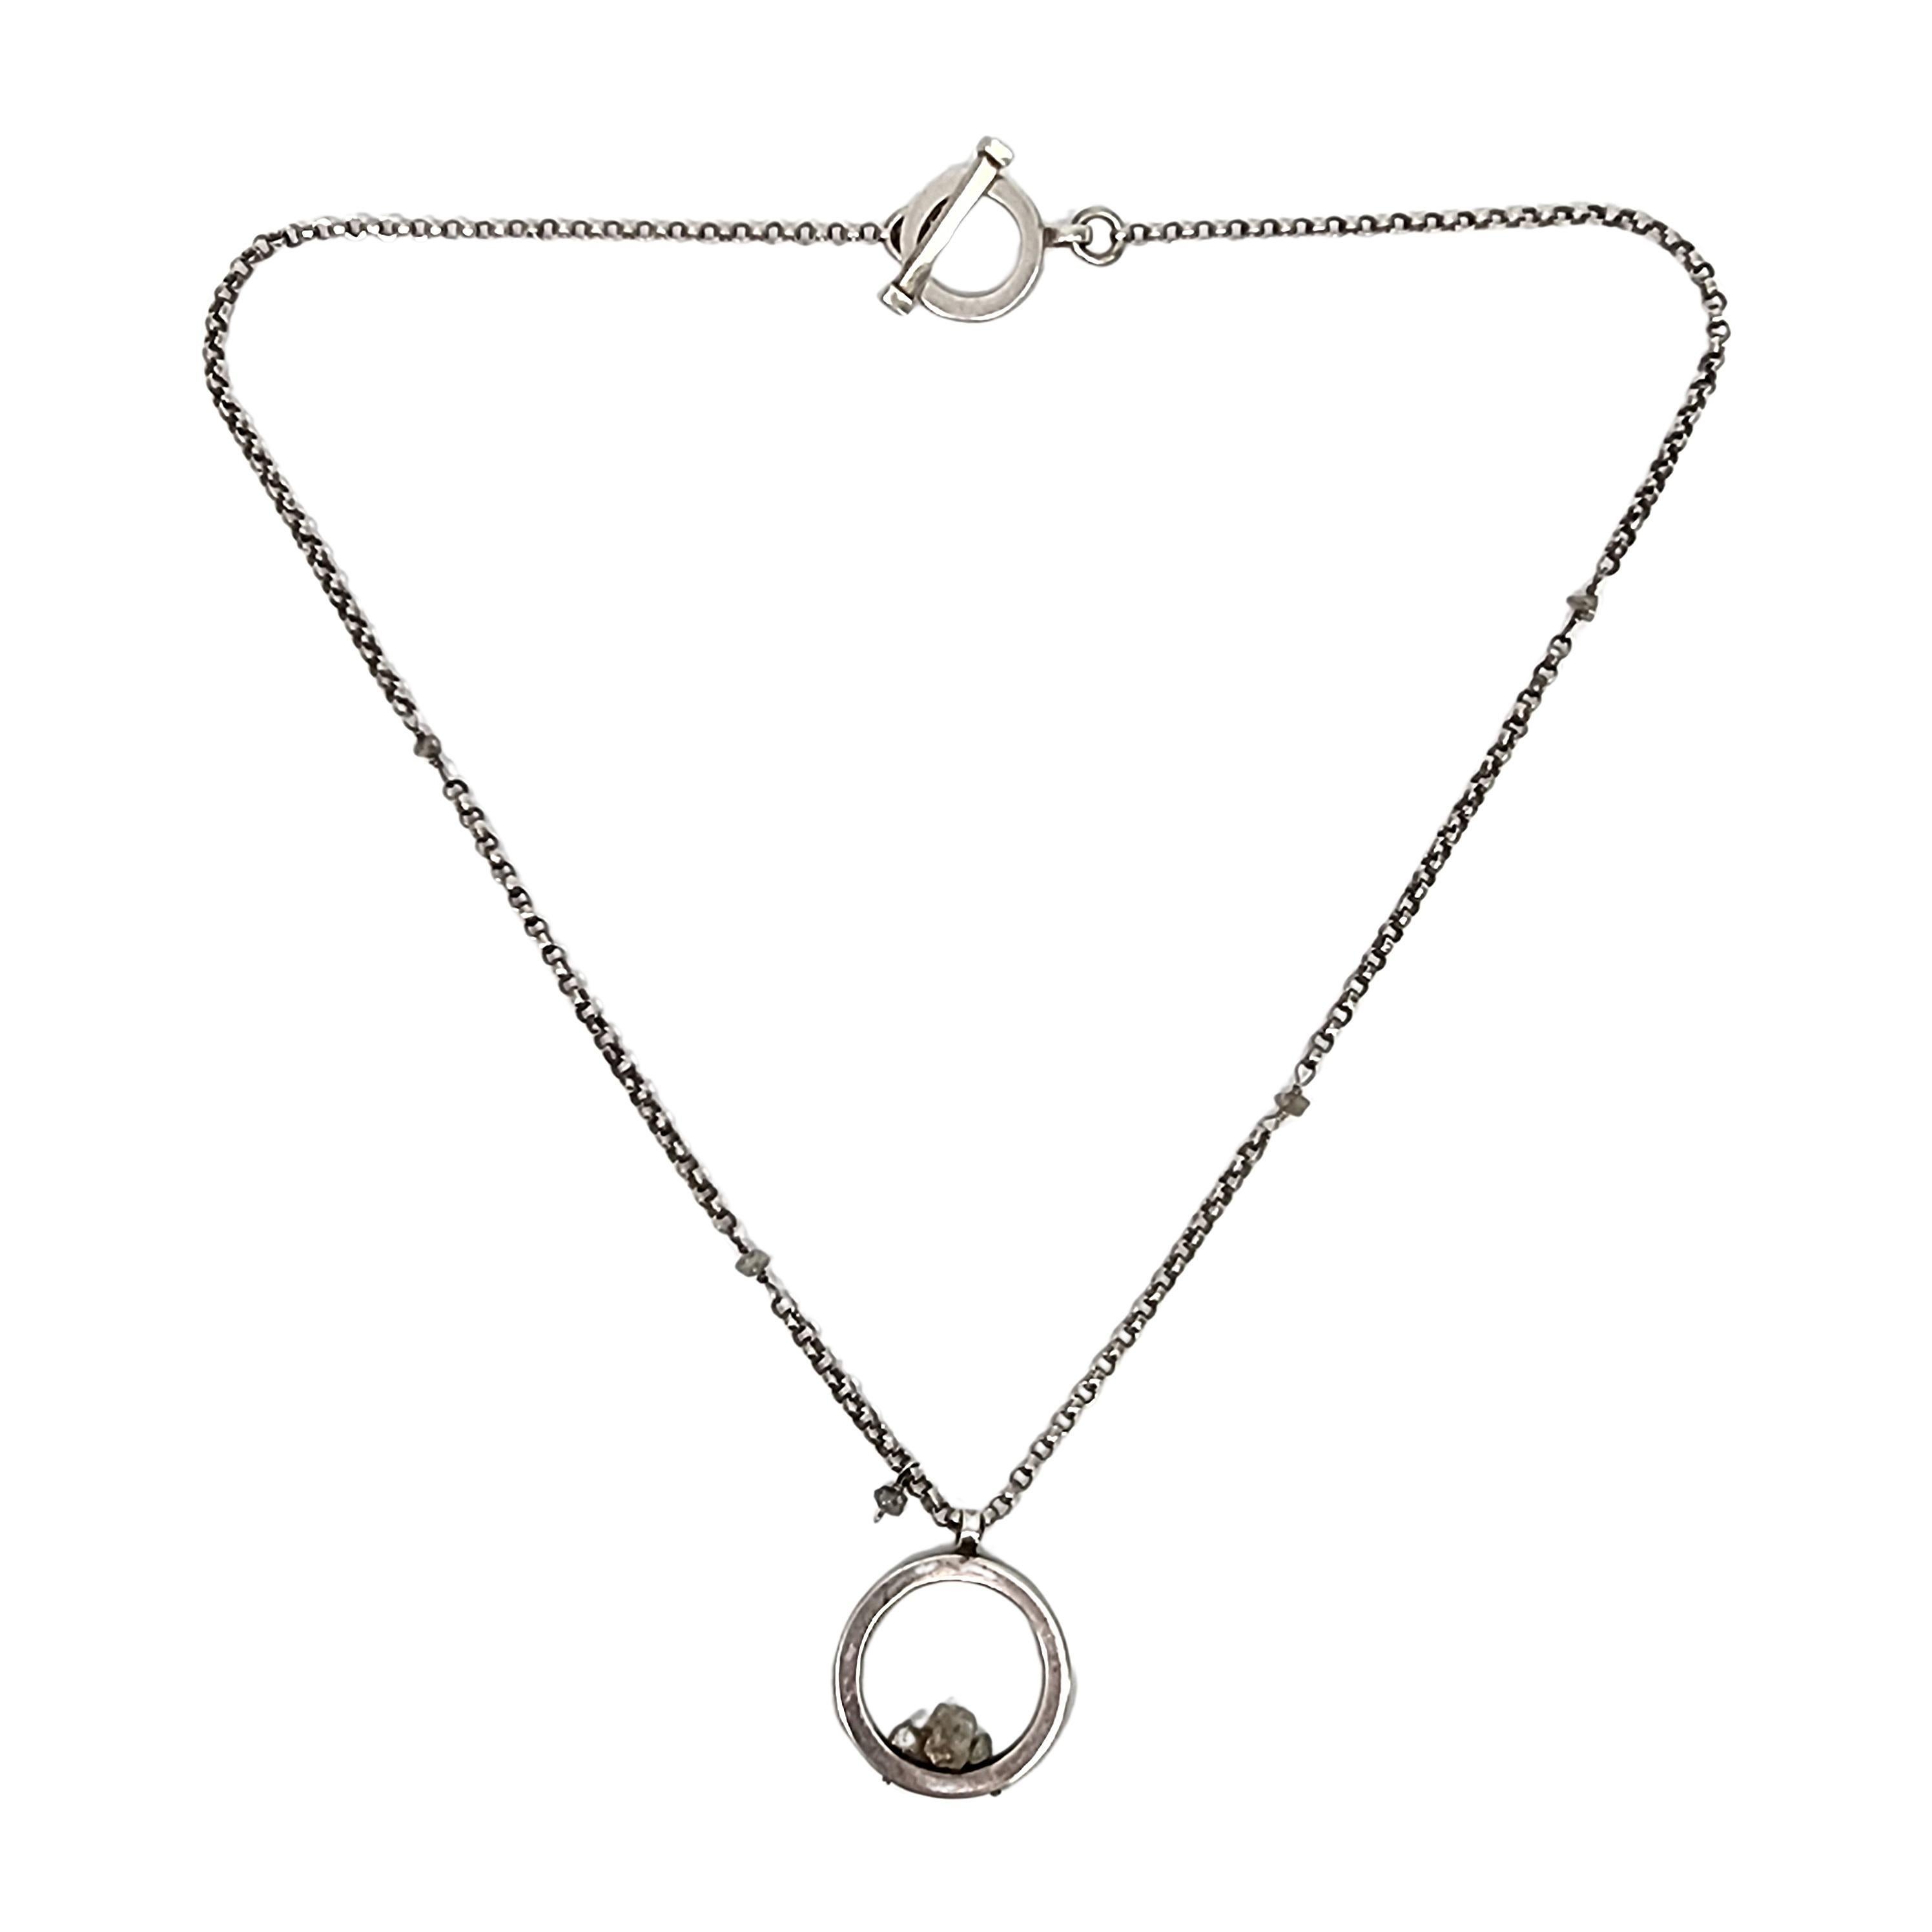 Sterling silver circle with small stones necklace and earring set by Mignon Faget.

The necklace features an open circle pendant with small stones that are green/yellow in color, the chain features the same stones in a grey color interspersed on the